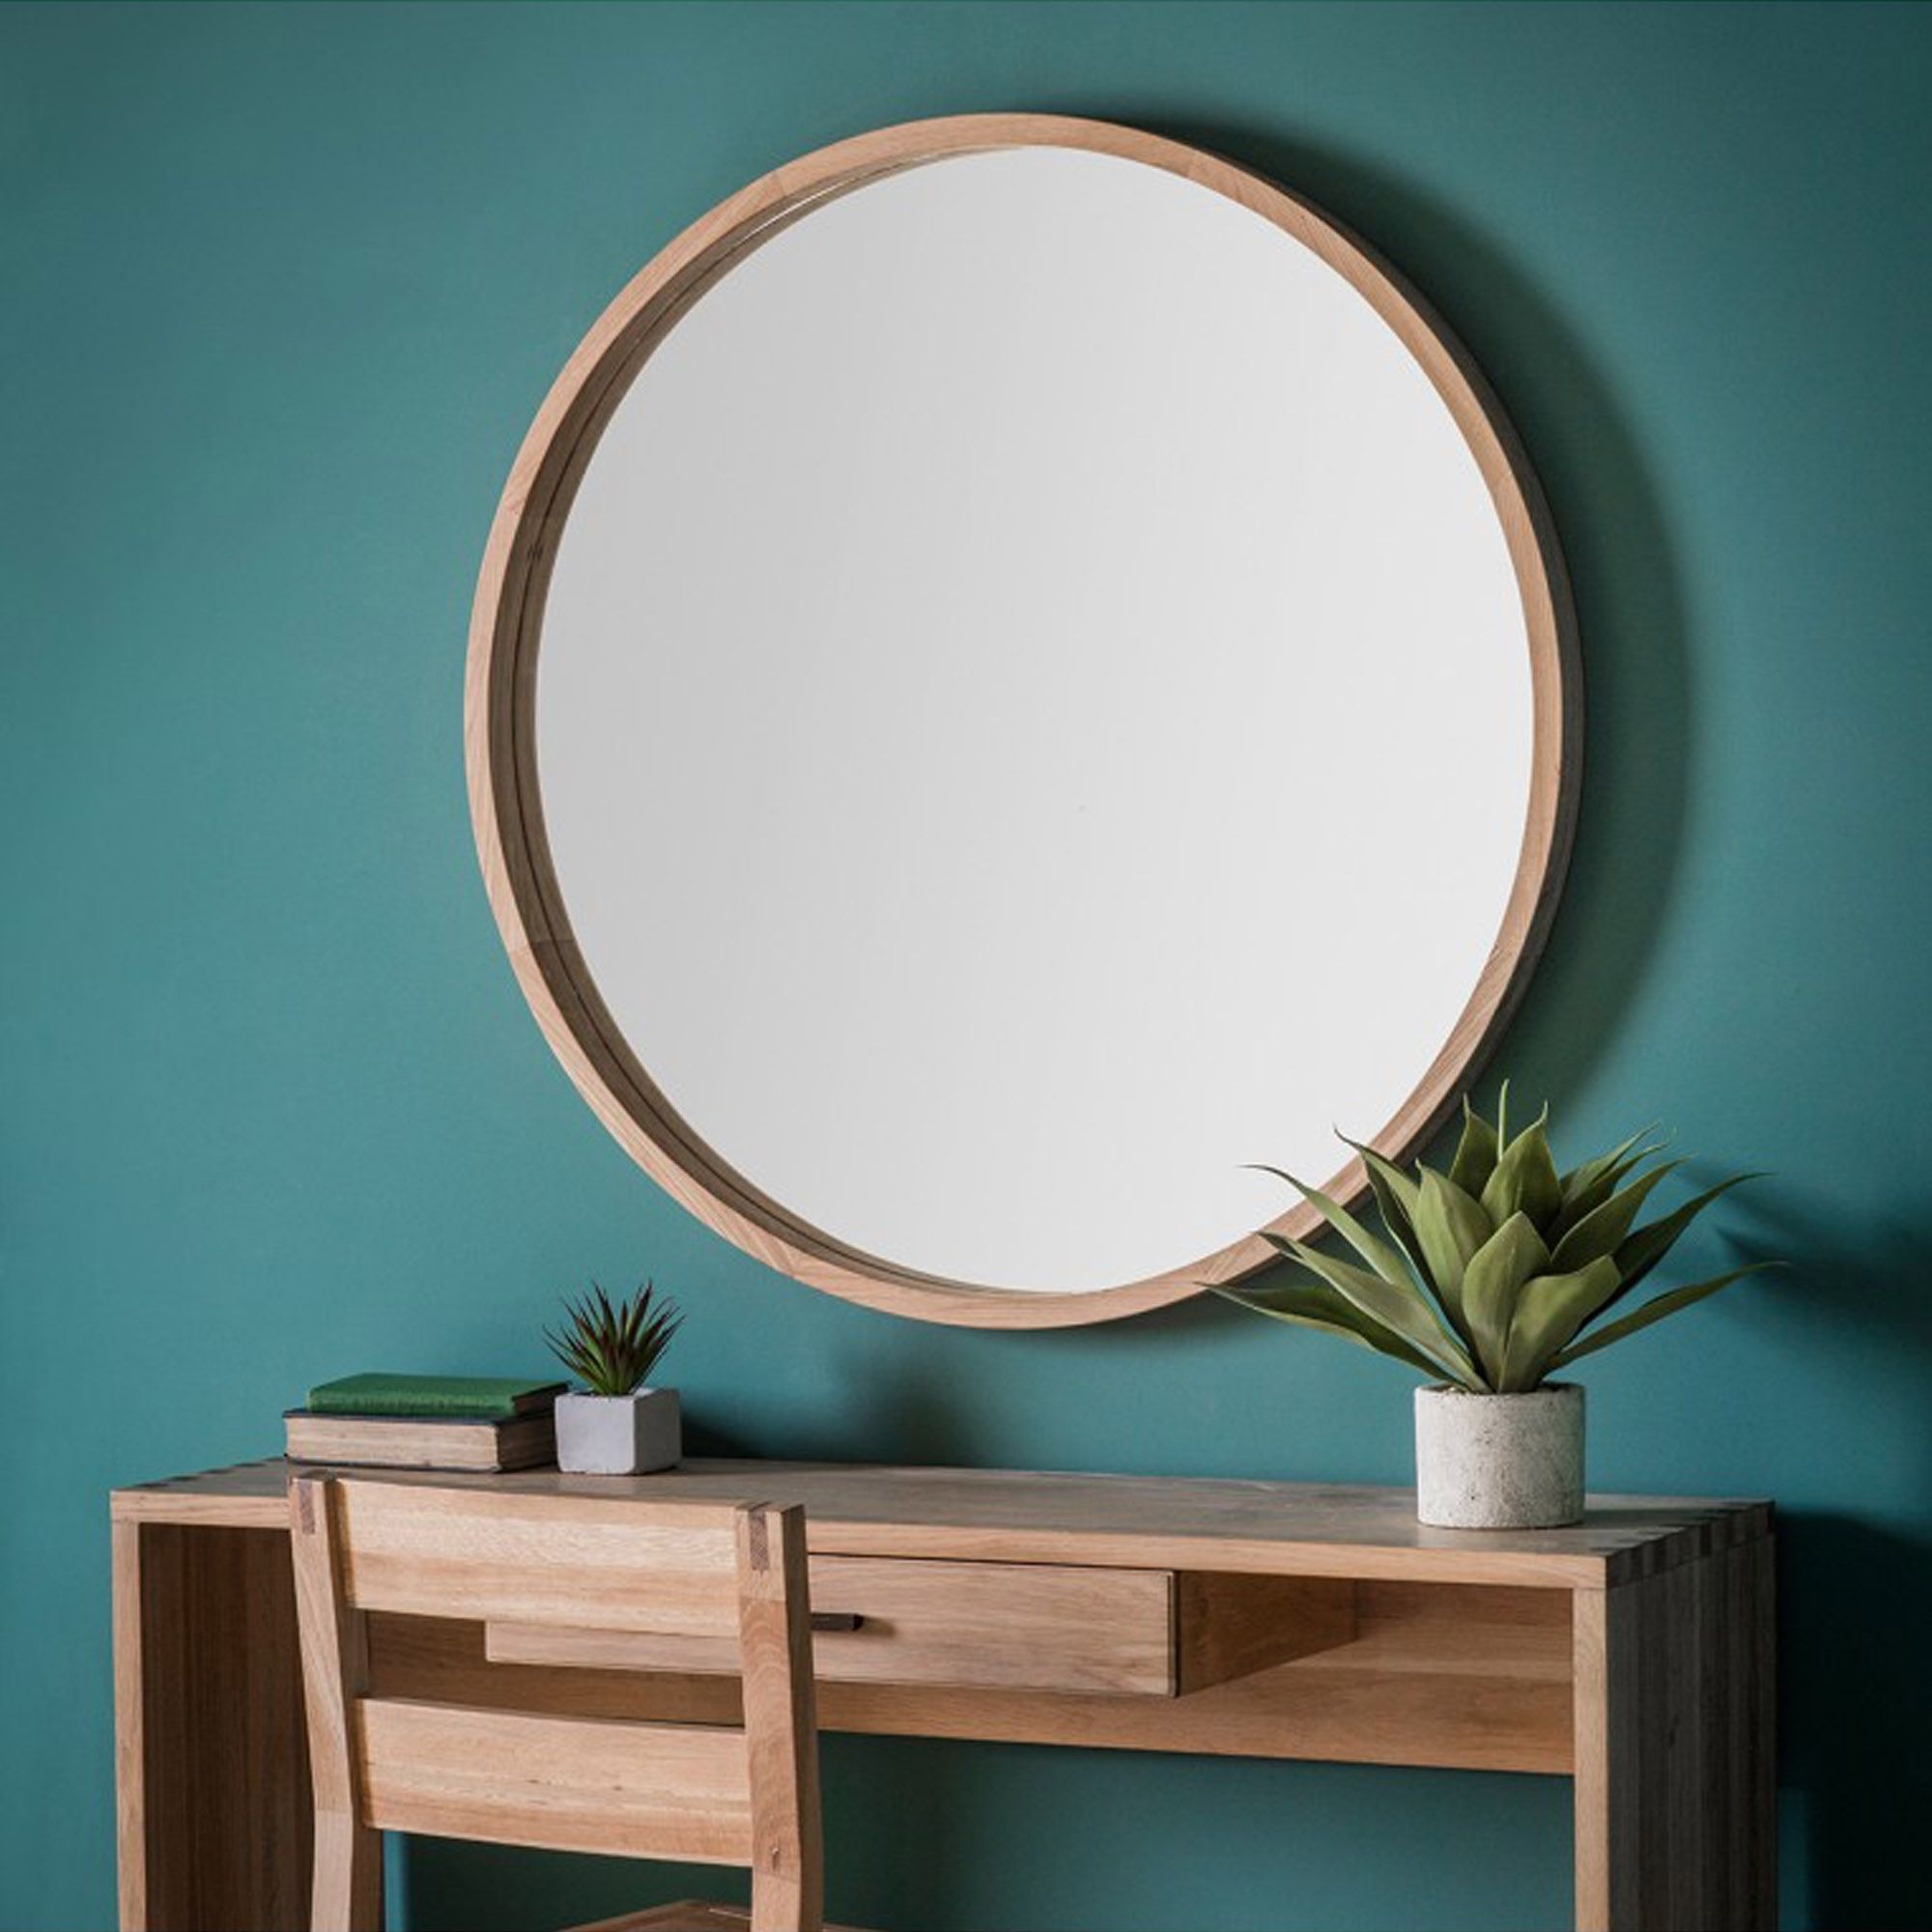 Bowman Large Round Wall Mirror | Wall Mirrors | Homesdirect365 For Round Scalloped Wall Mirrors (View 15 of 15)